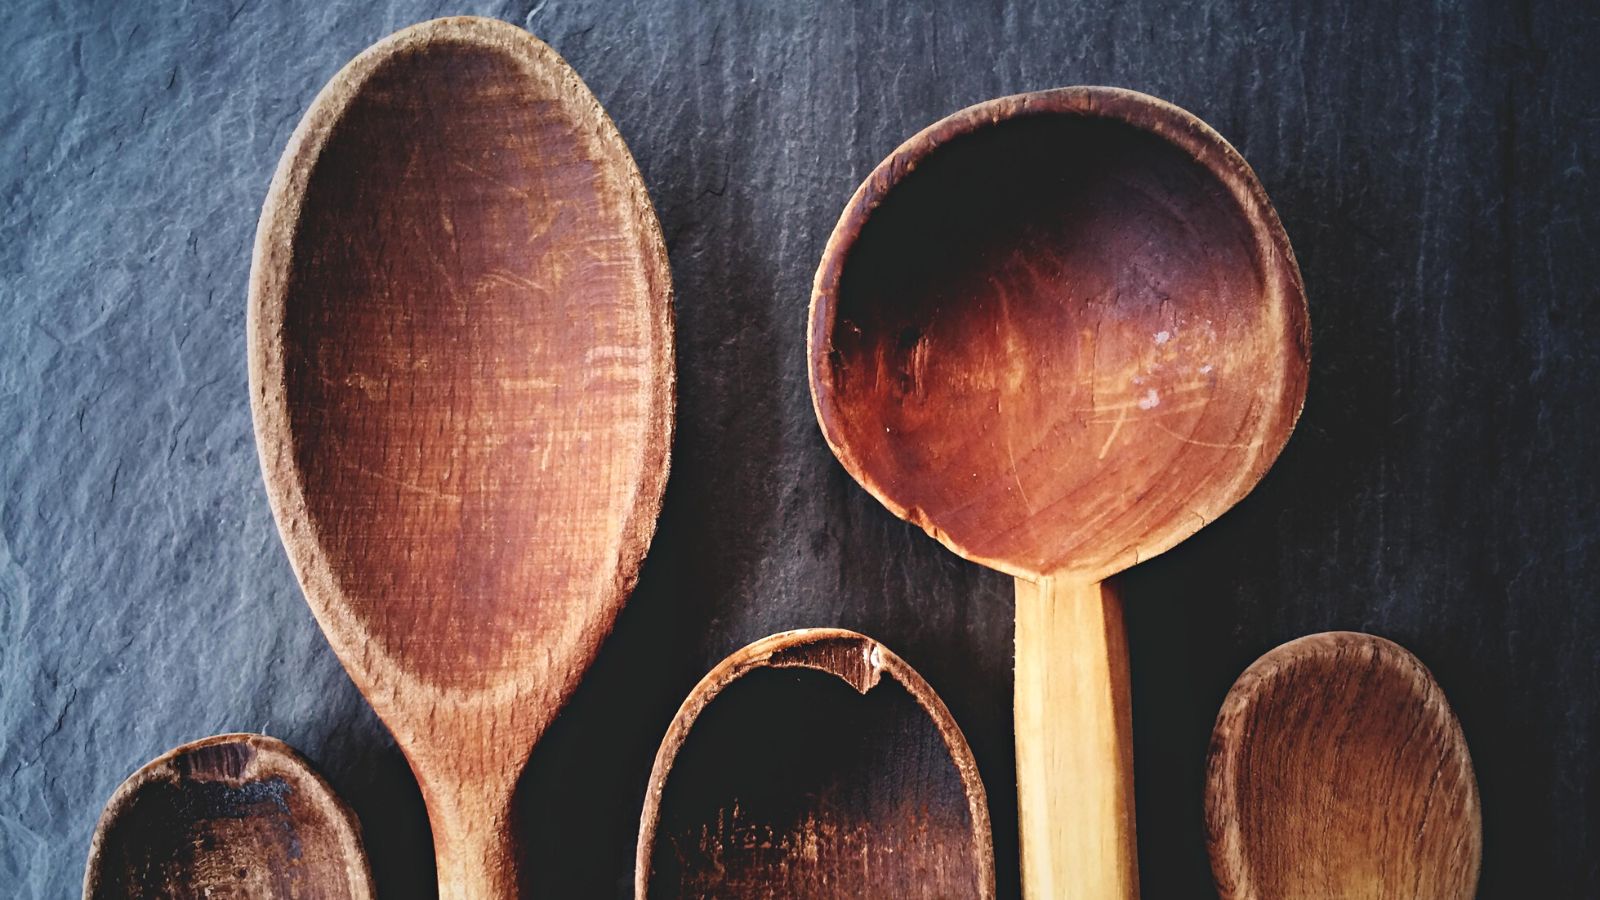 How to Clean Wooden Spoons